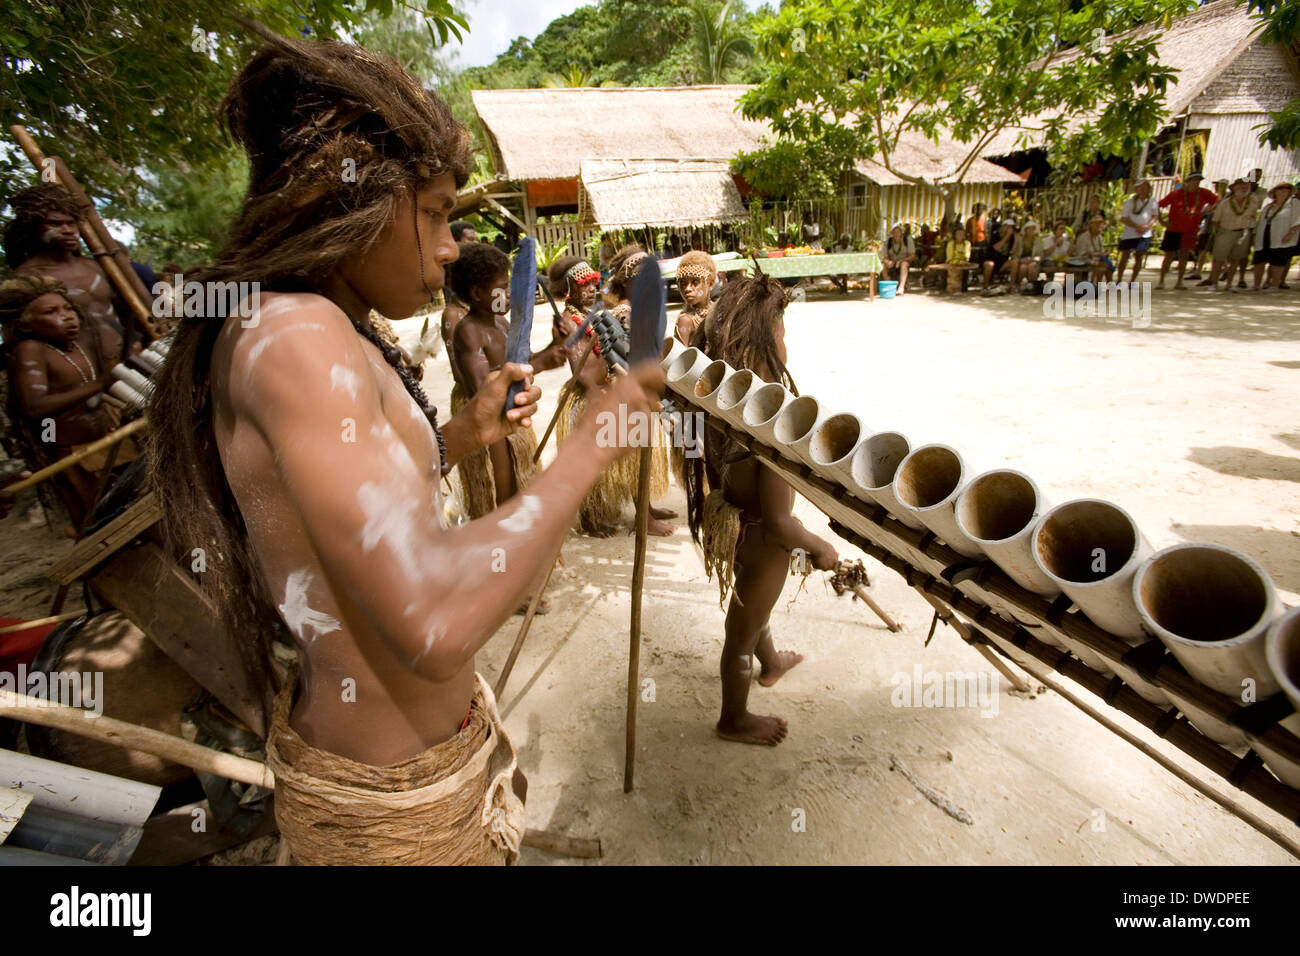 Young men perform on homemade plastic musical instruments at Nggela Island, Solomon Islands, South Pacific Stock Photo